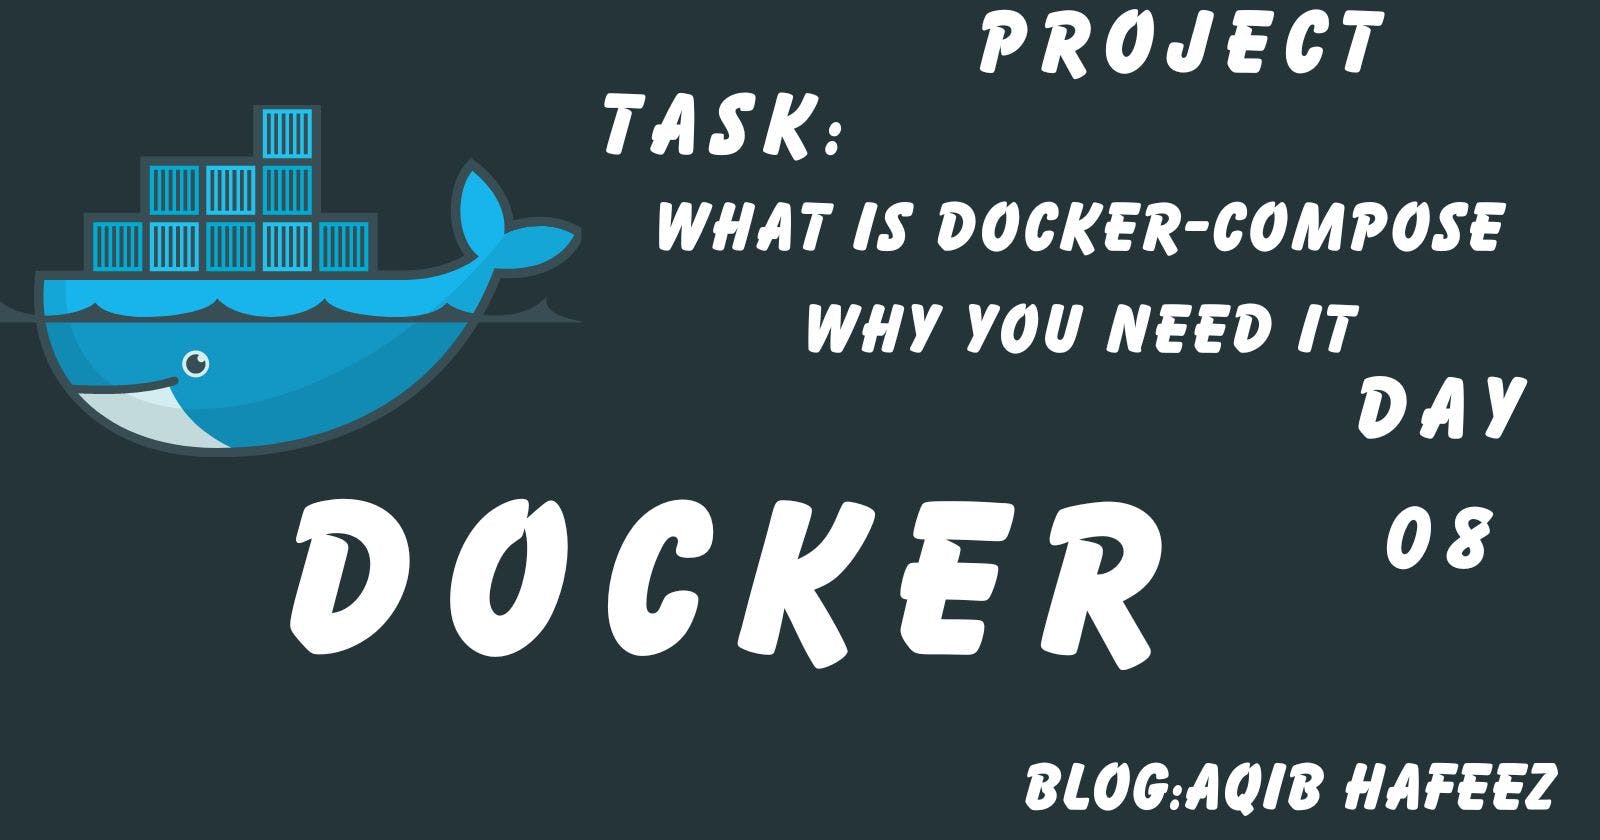 Day 08 || What is docker-compose: What It Is, Why You Need It, and Essential Commands